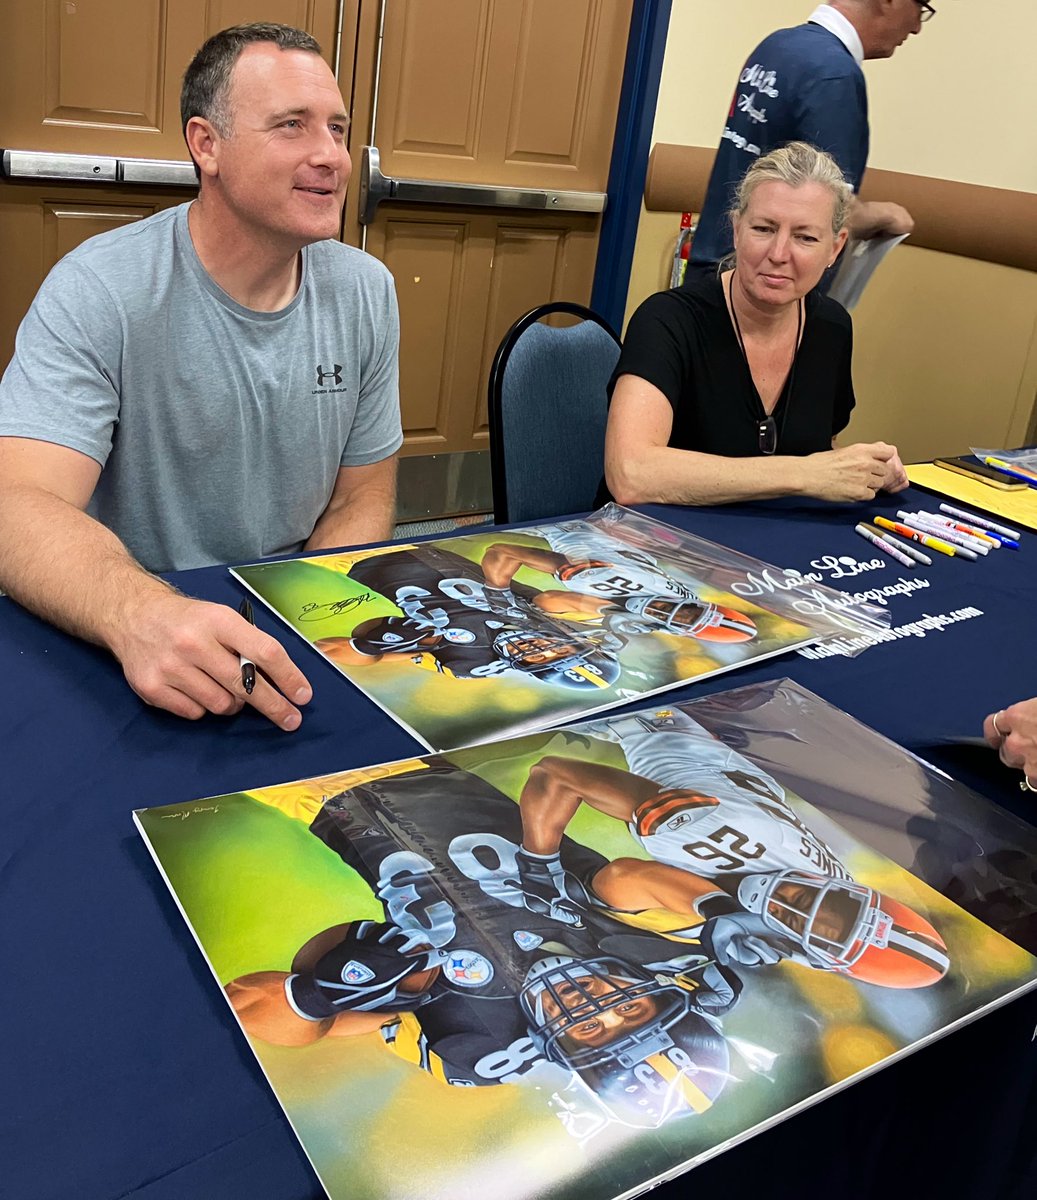 Great weekend catching up with some @steelers legends and hundreds of fans in Monroeville PA. Thank you Pittsburgh for an amazing weekend! #pittsburgh #steelers #herewego  #ArtistsOfTwitter  #ArtForYinz 🔥🎨